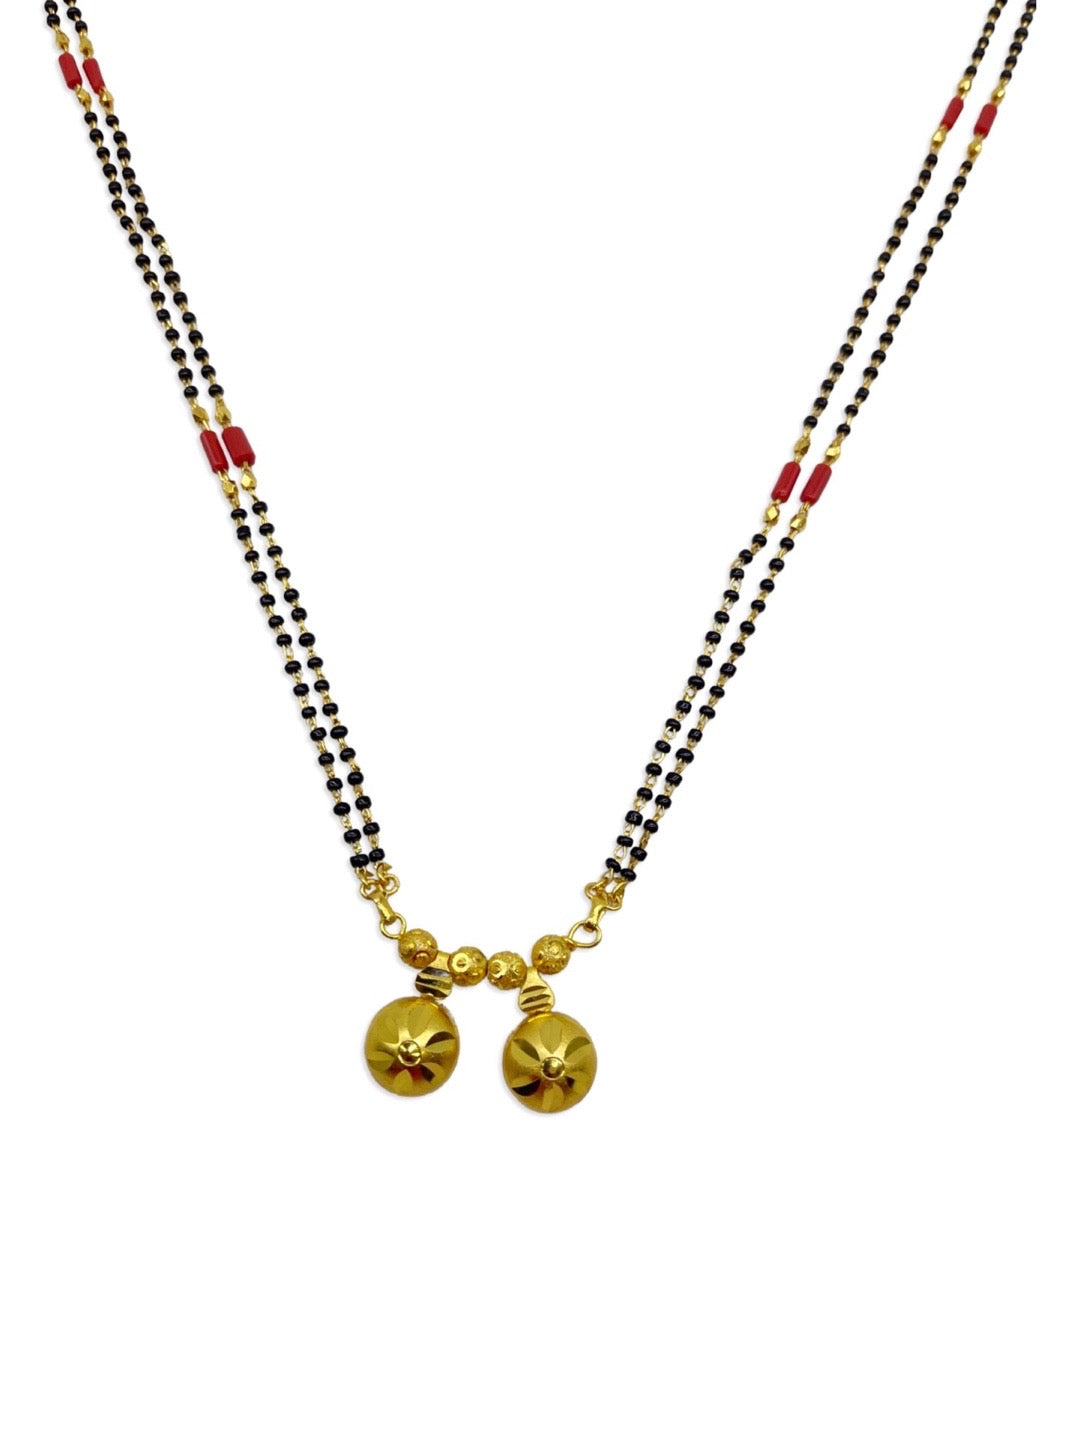 traditional mangalsutra with black beads